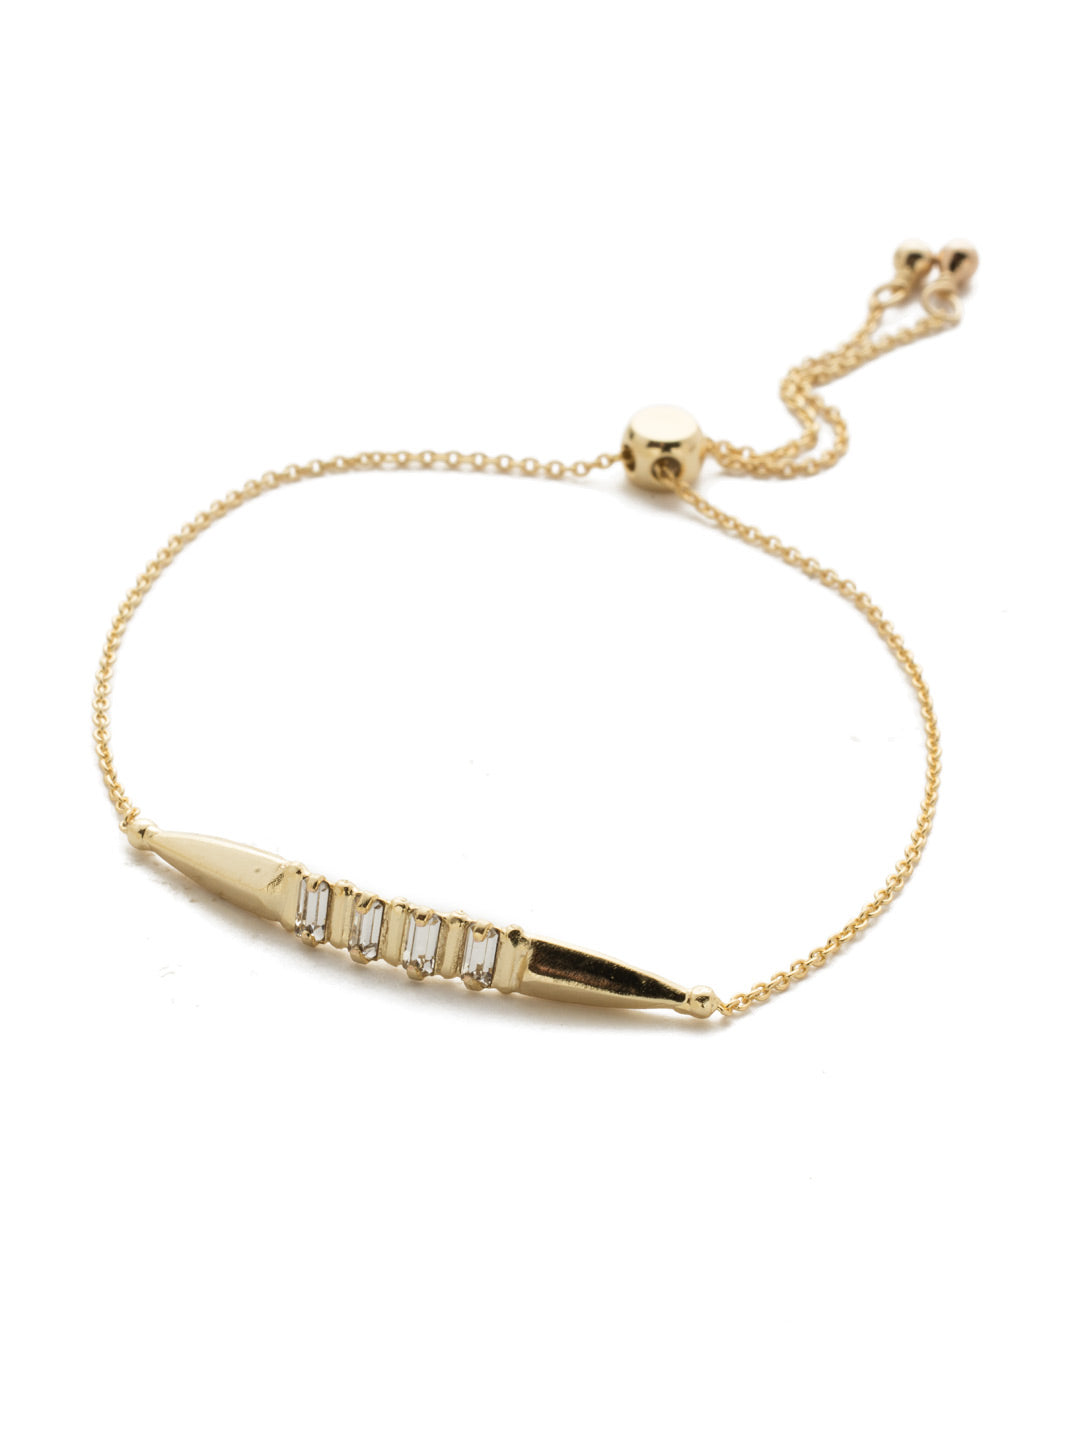 Halcyon Cursory Crystal Slider Bracelet - 4BEK28BGCRY - <p>Slip on some edge with this adjustable bracelet featuring a pointed metal statement piece and a foursome of beautiful baguette crystals. From Sorrelli's Crystal collection in our Bright Gold-tone finish.</p>